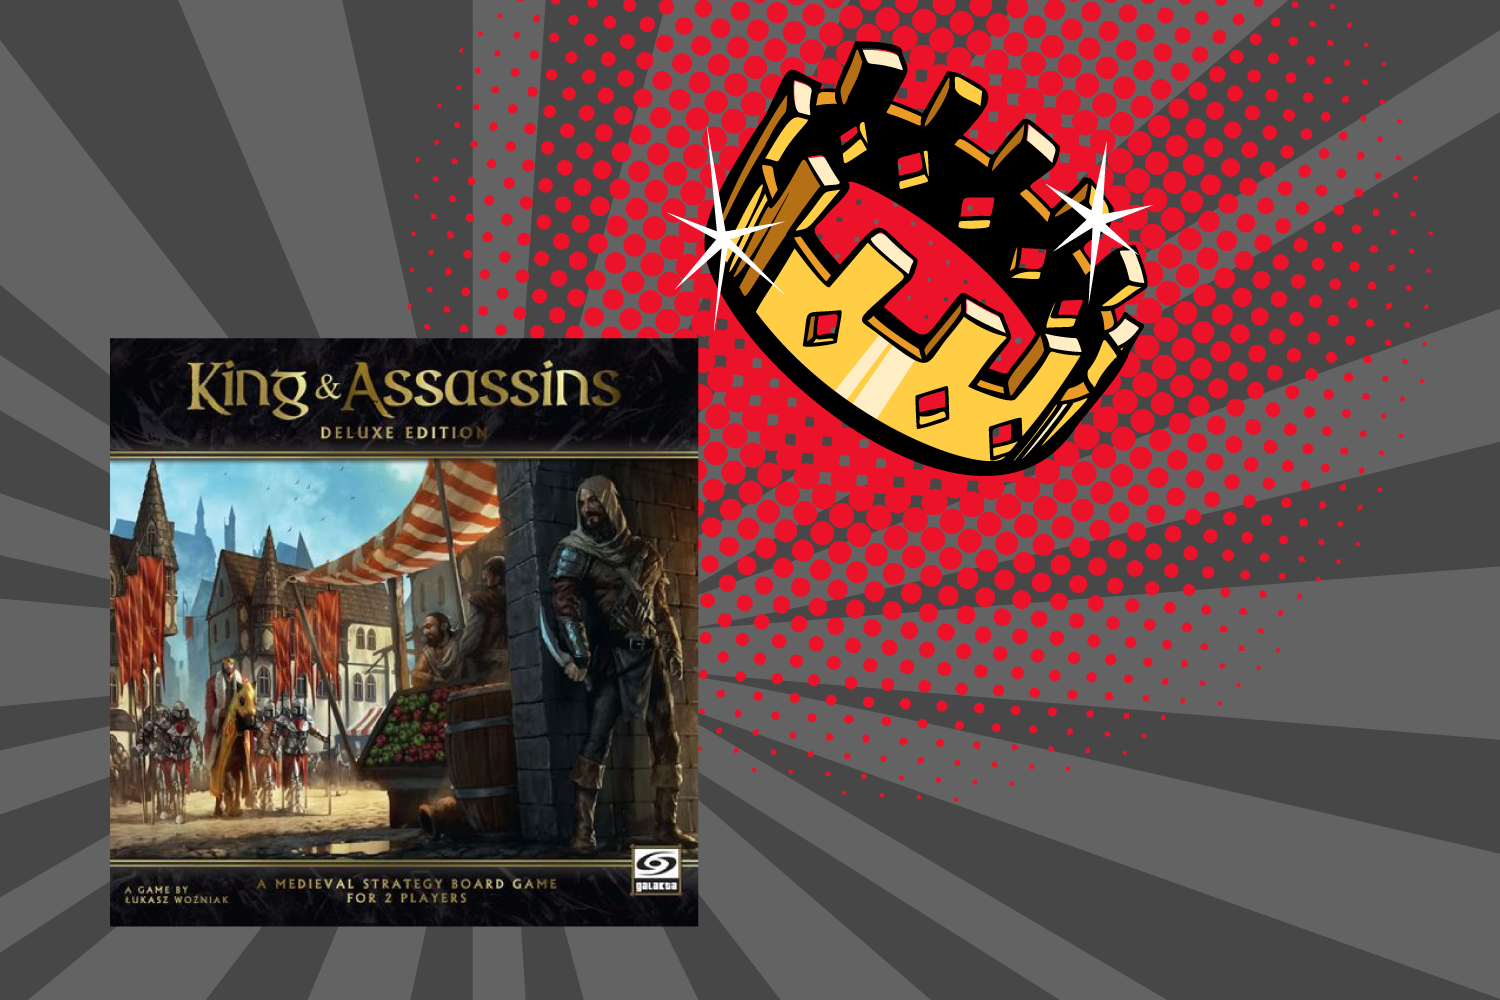 King-and-Assassins-Deluxe-edition-board-game-review